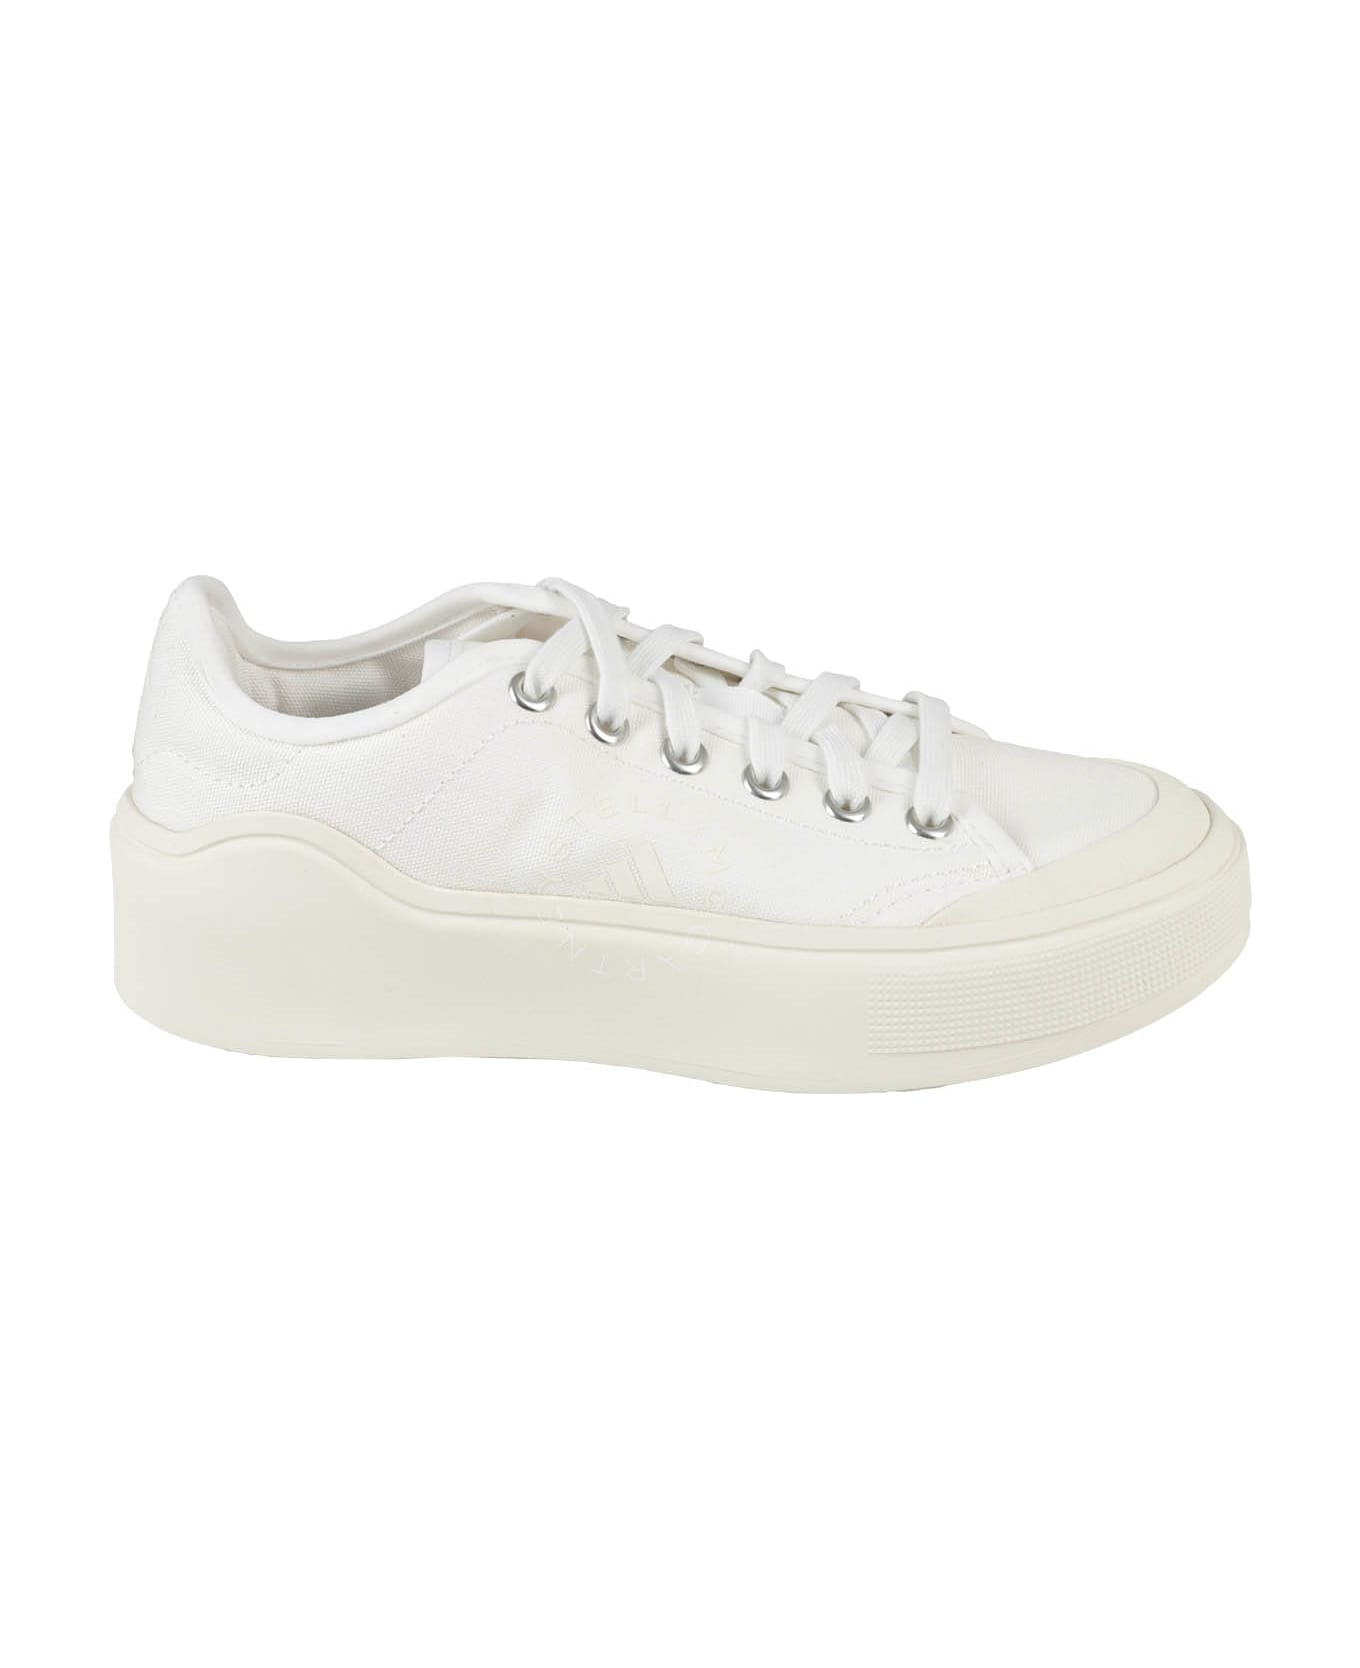 Adidas by Stella McCartney Court Cotton Sneakers Hq8675 - Bianco スニーカー